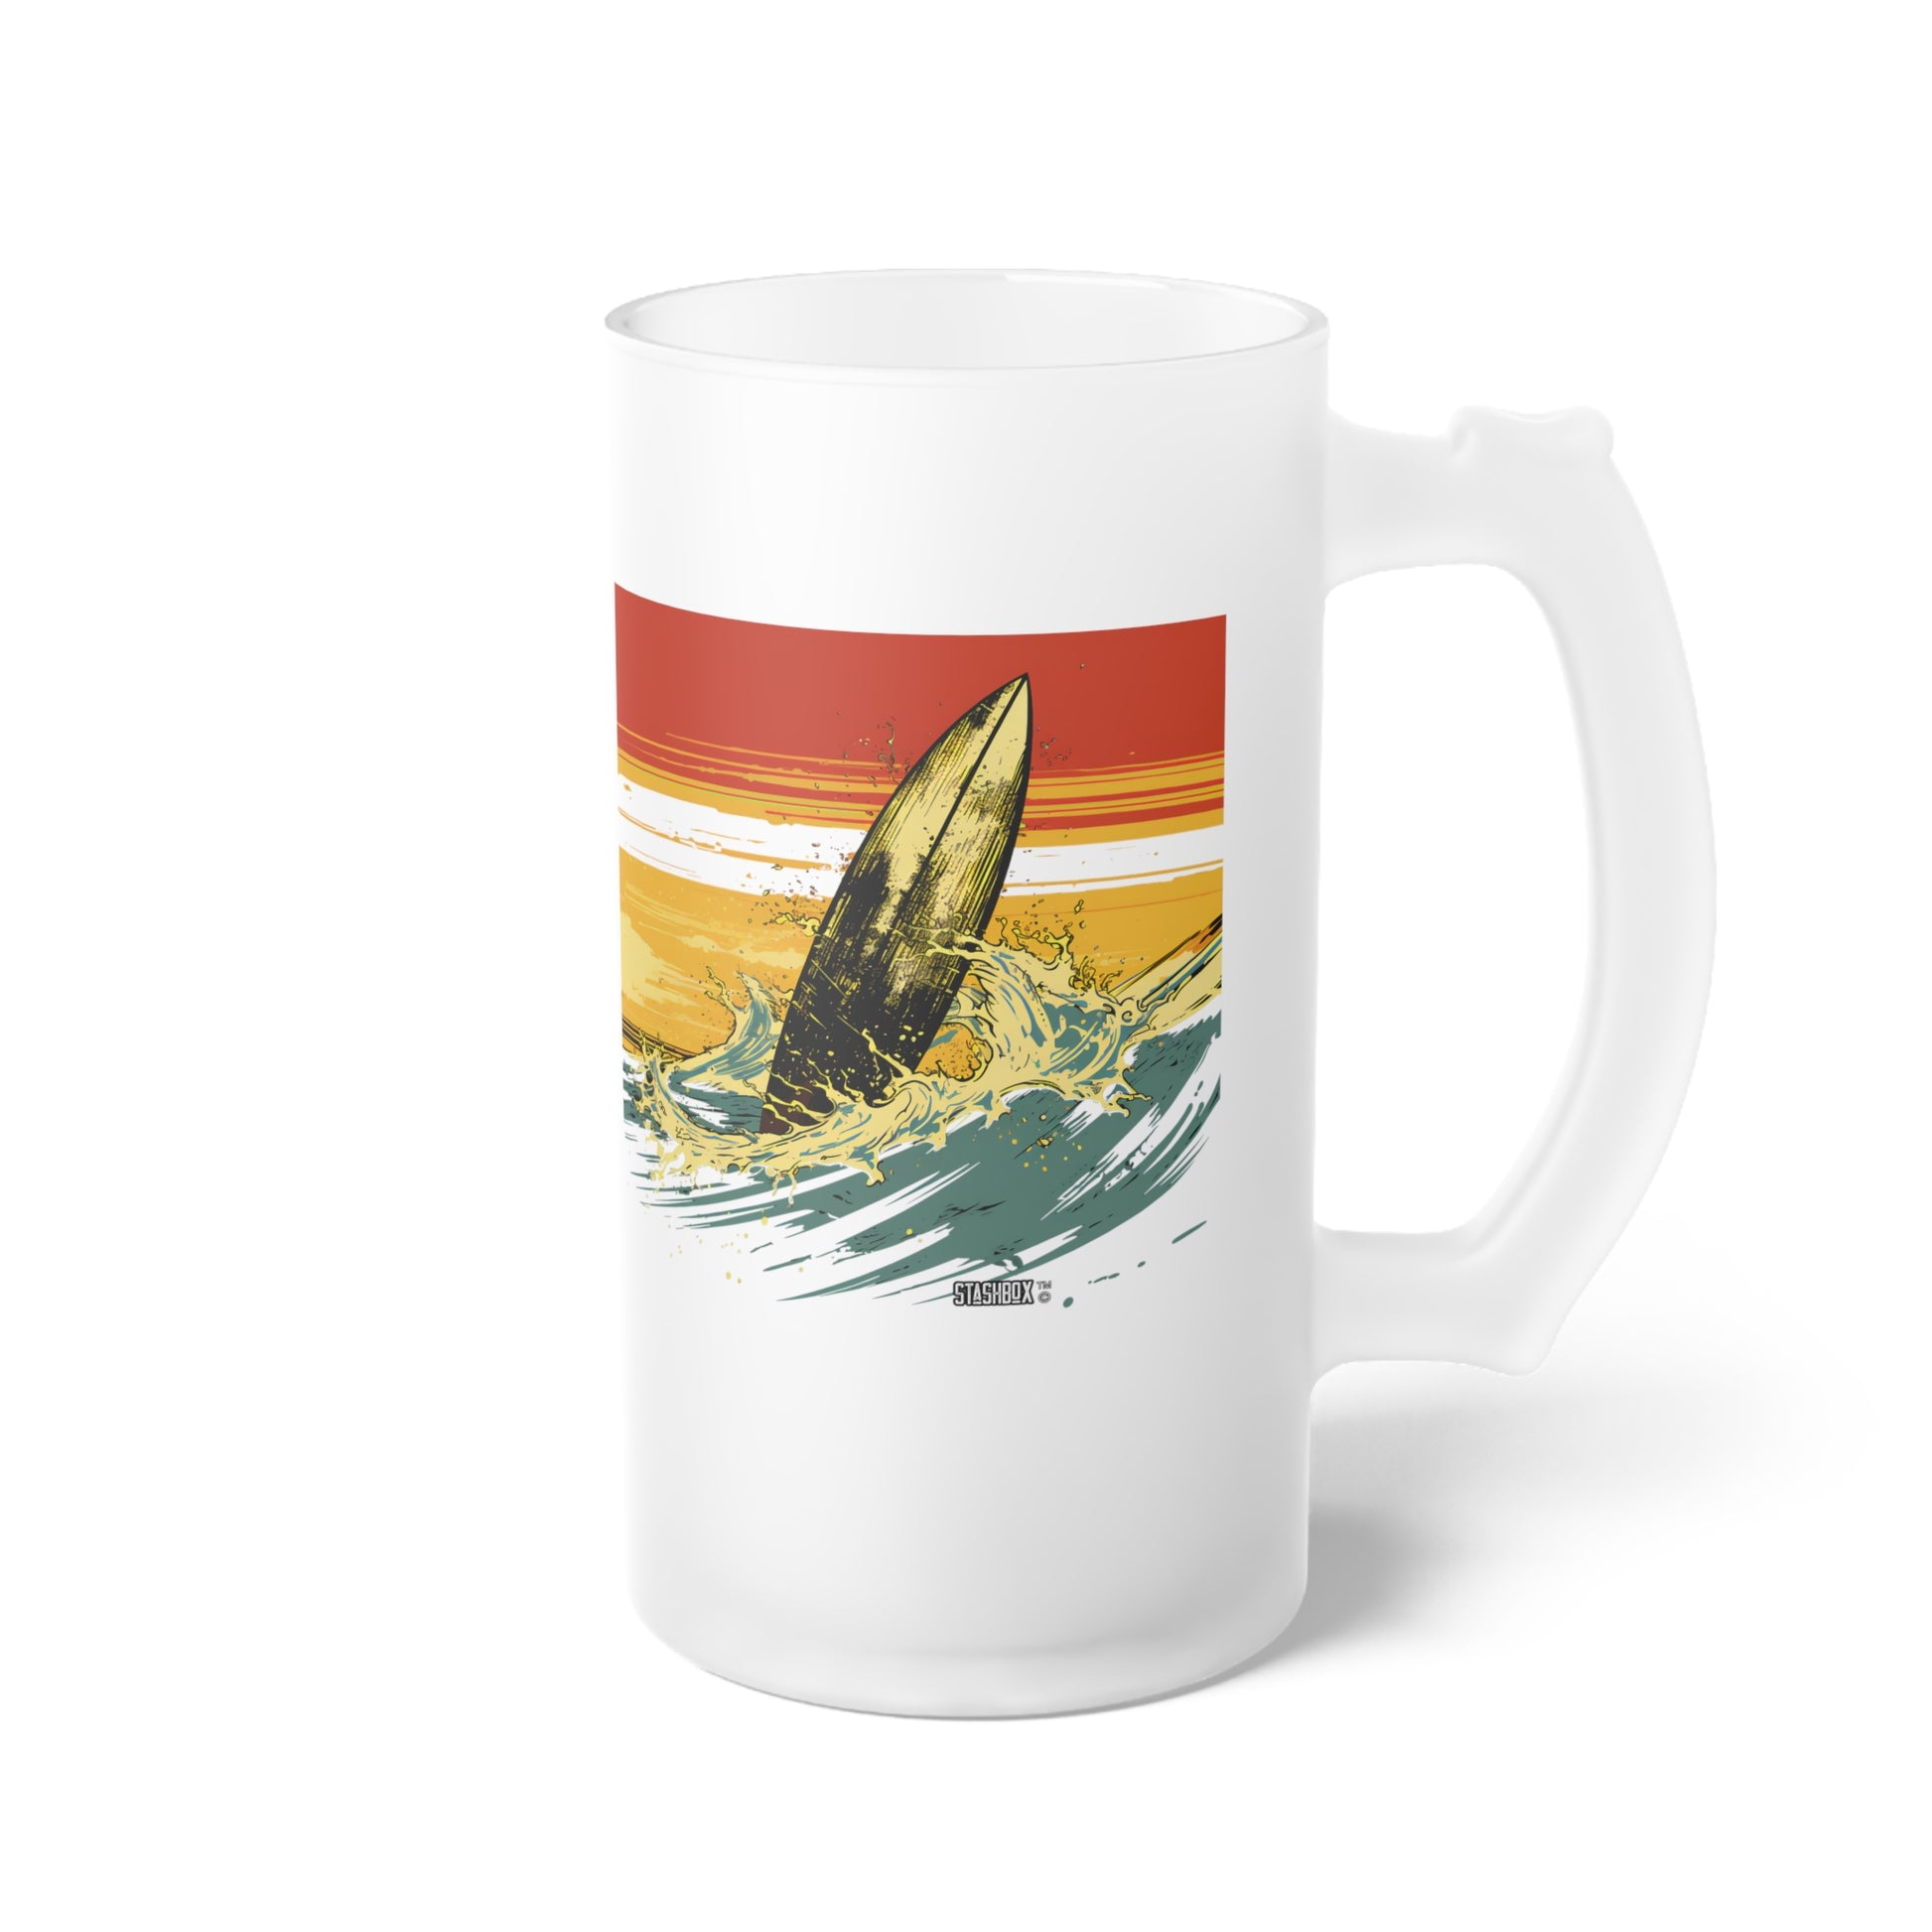 Raise a glass to the waves with our Classic Surfing Design Beer Mug, 16oz. 2 Designs in 1 - Waves Design #66. Discover the art of surfing, uniquely crafted by Stashbox.ai.